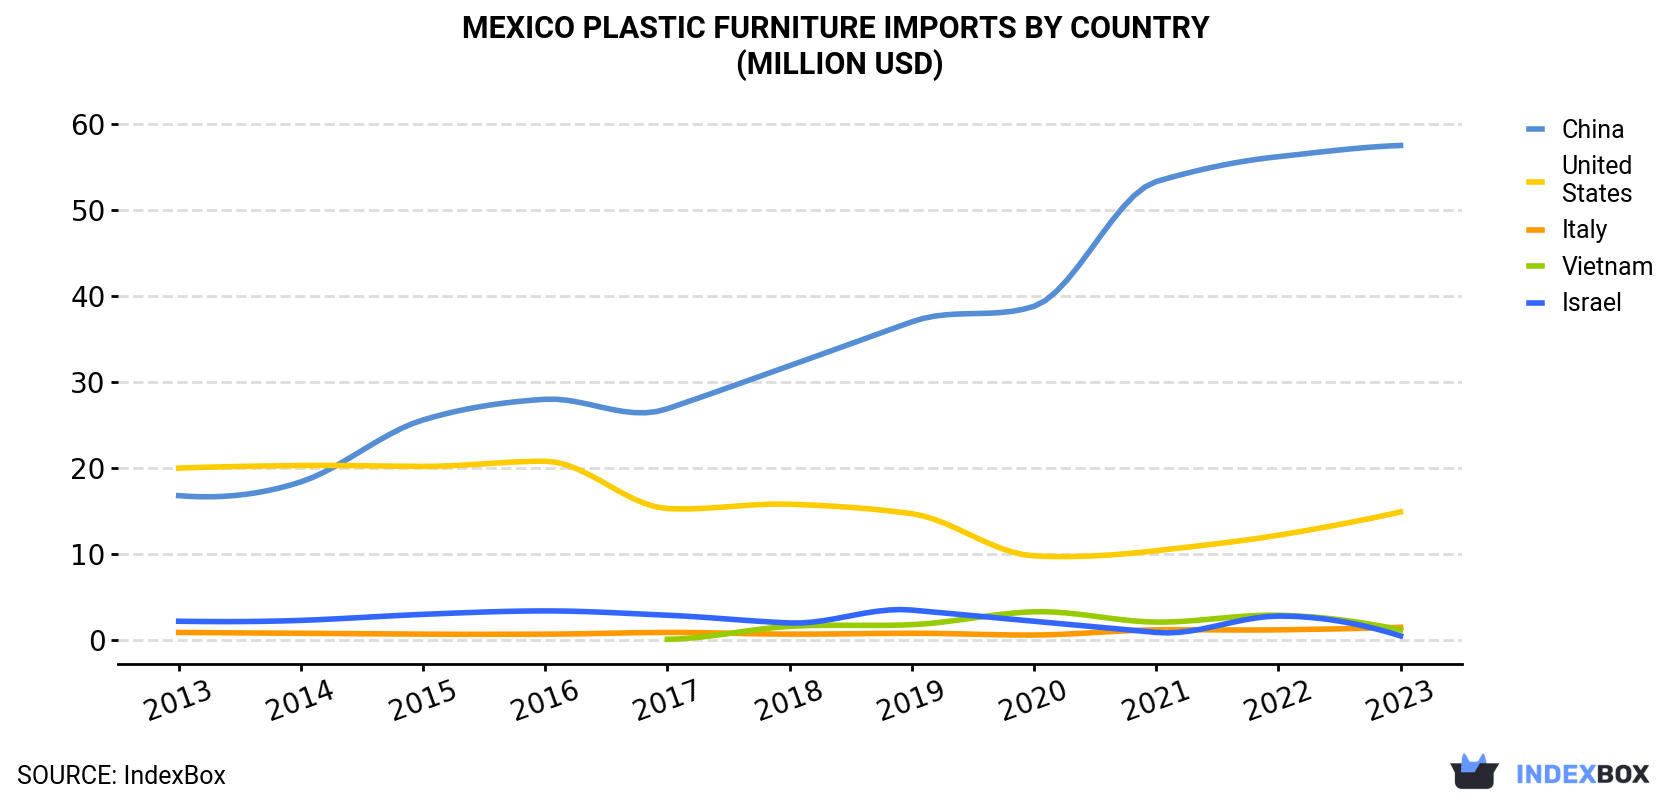 Mexico Plastic Furniture Imports By Country (Million USD)